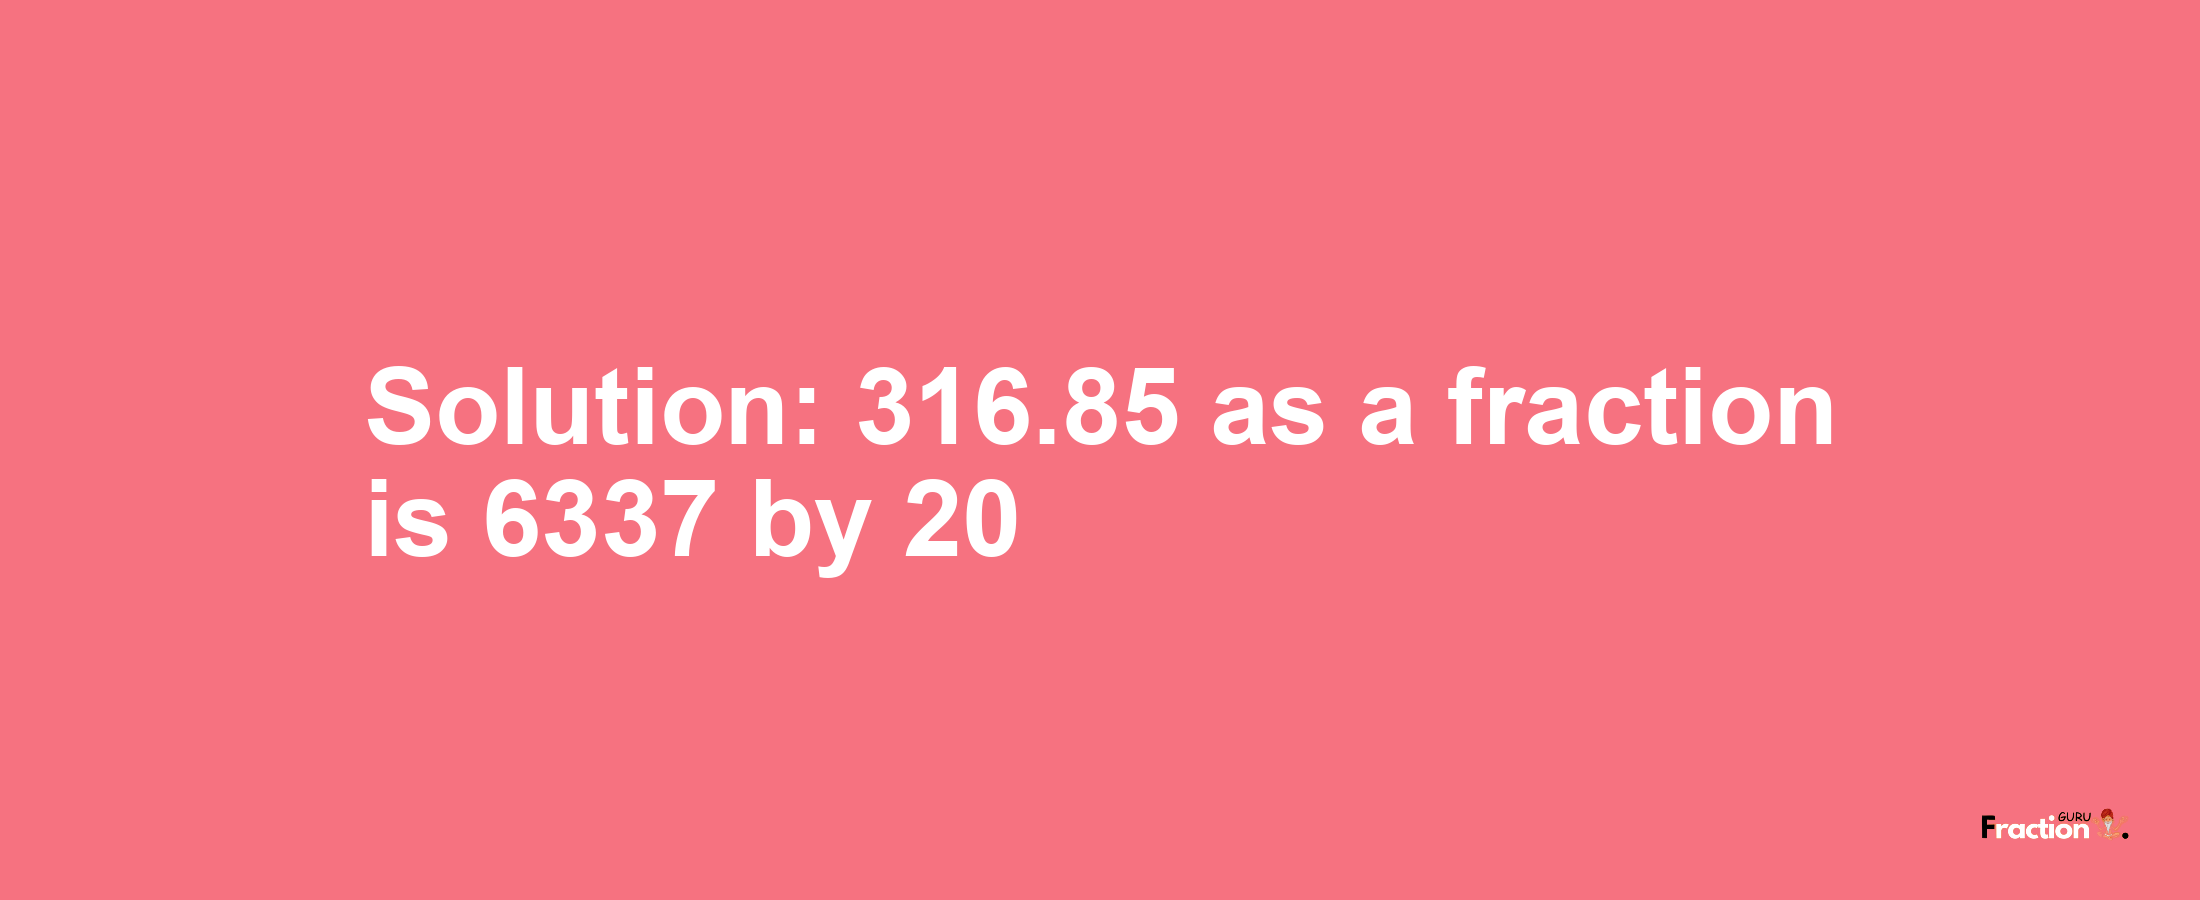 Solution:316.85 as a fraction is 6337/20